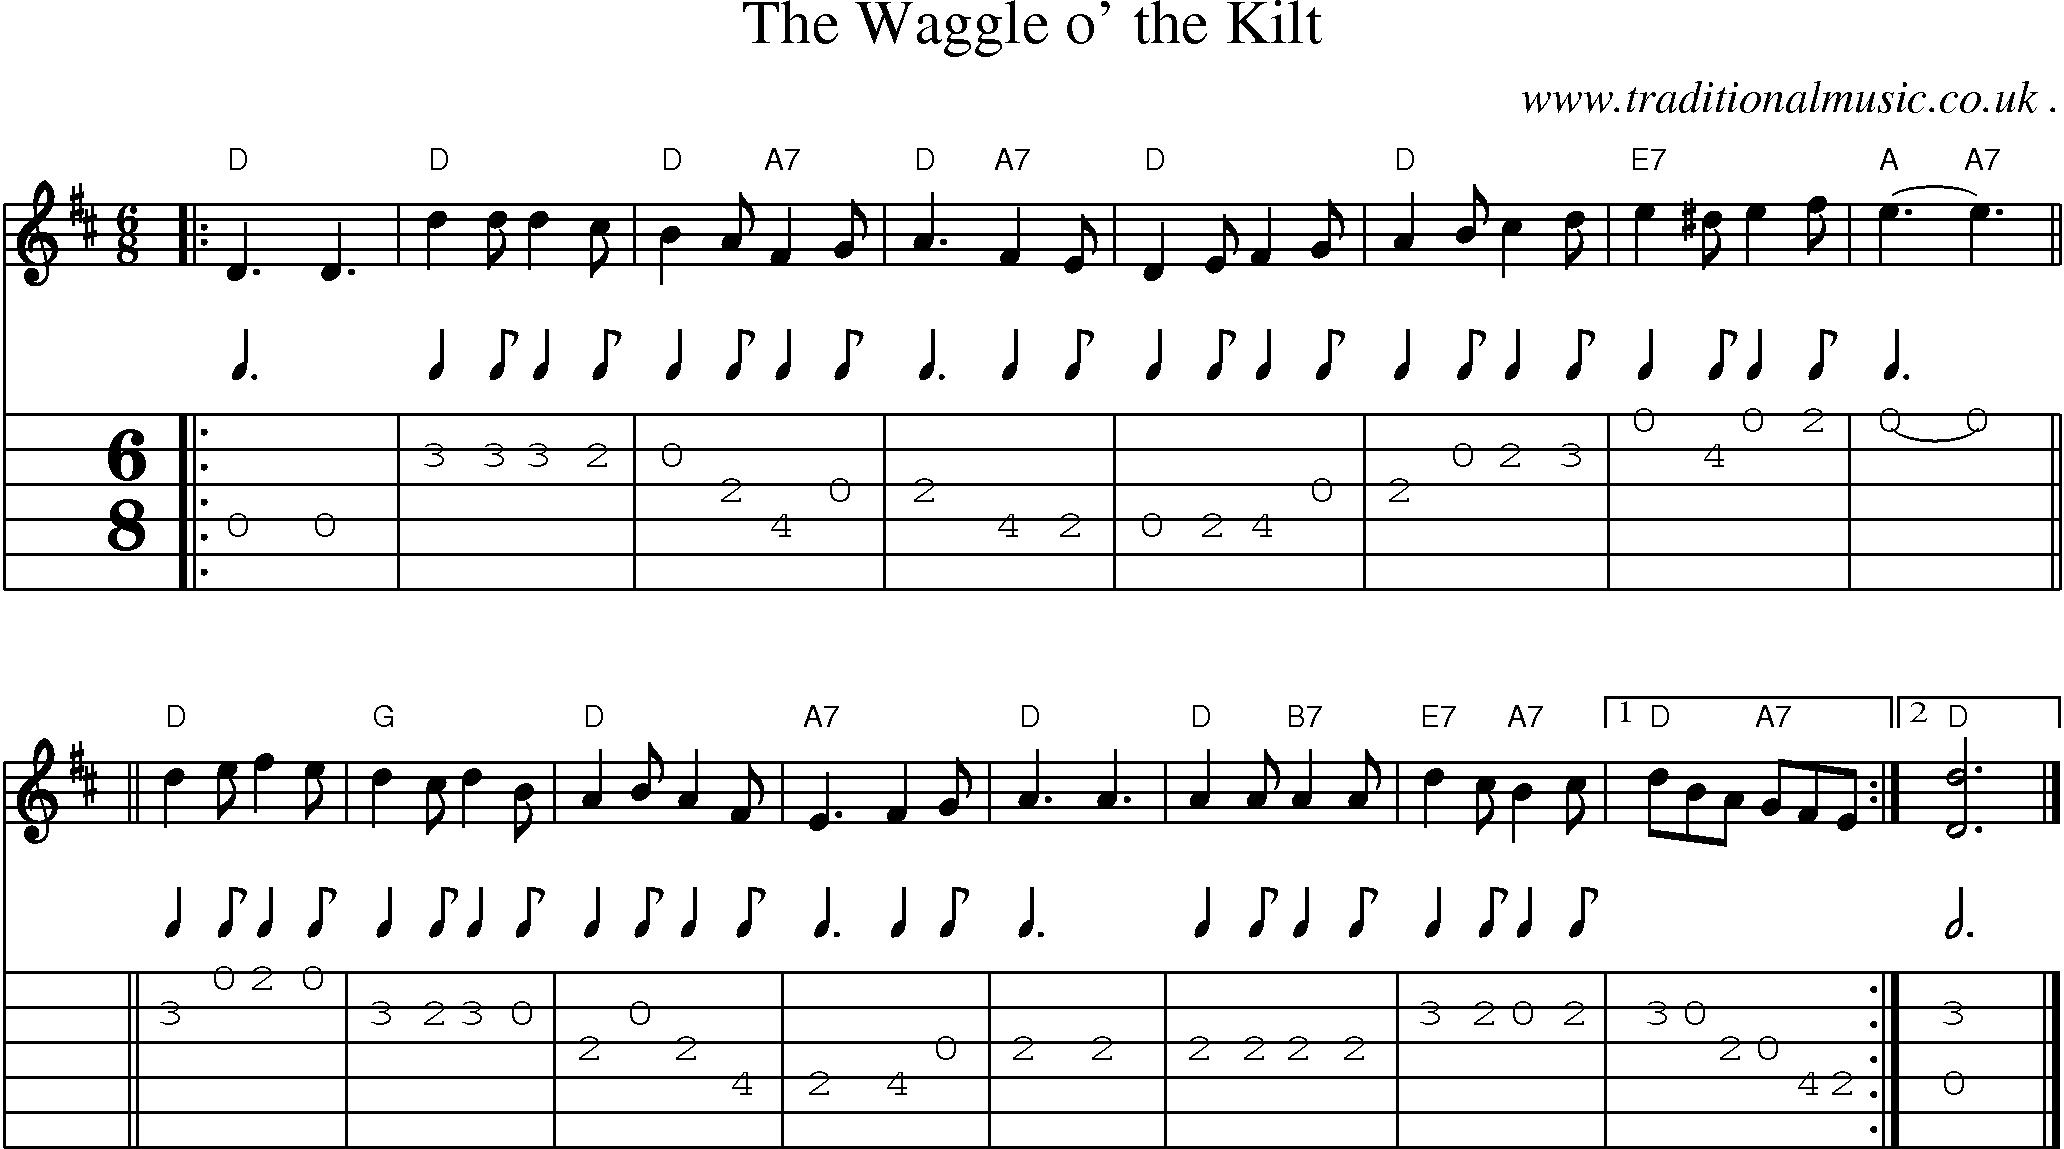 Sheet-music  score, Chords and Guitar Tabs for The Waggle O The Kilt